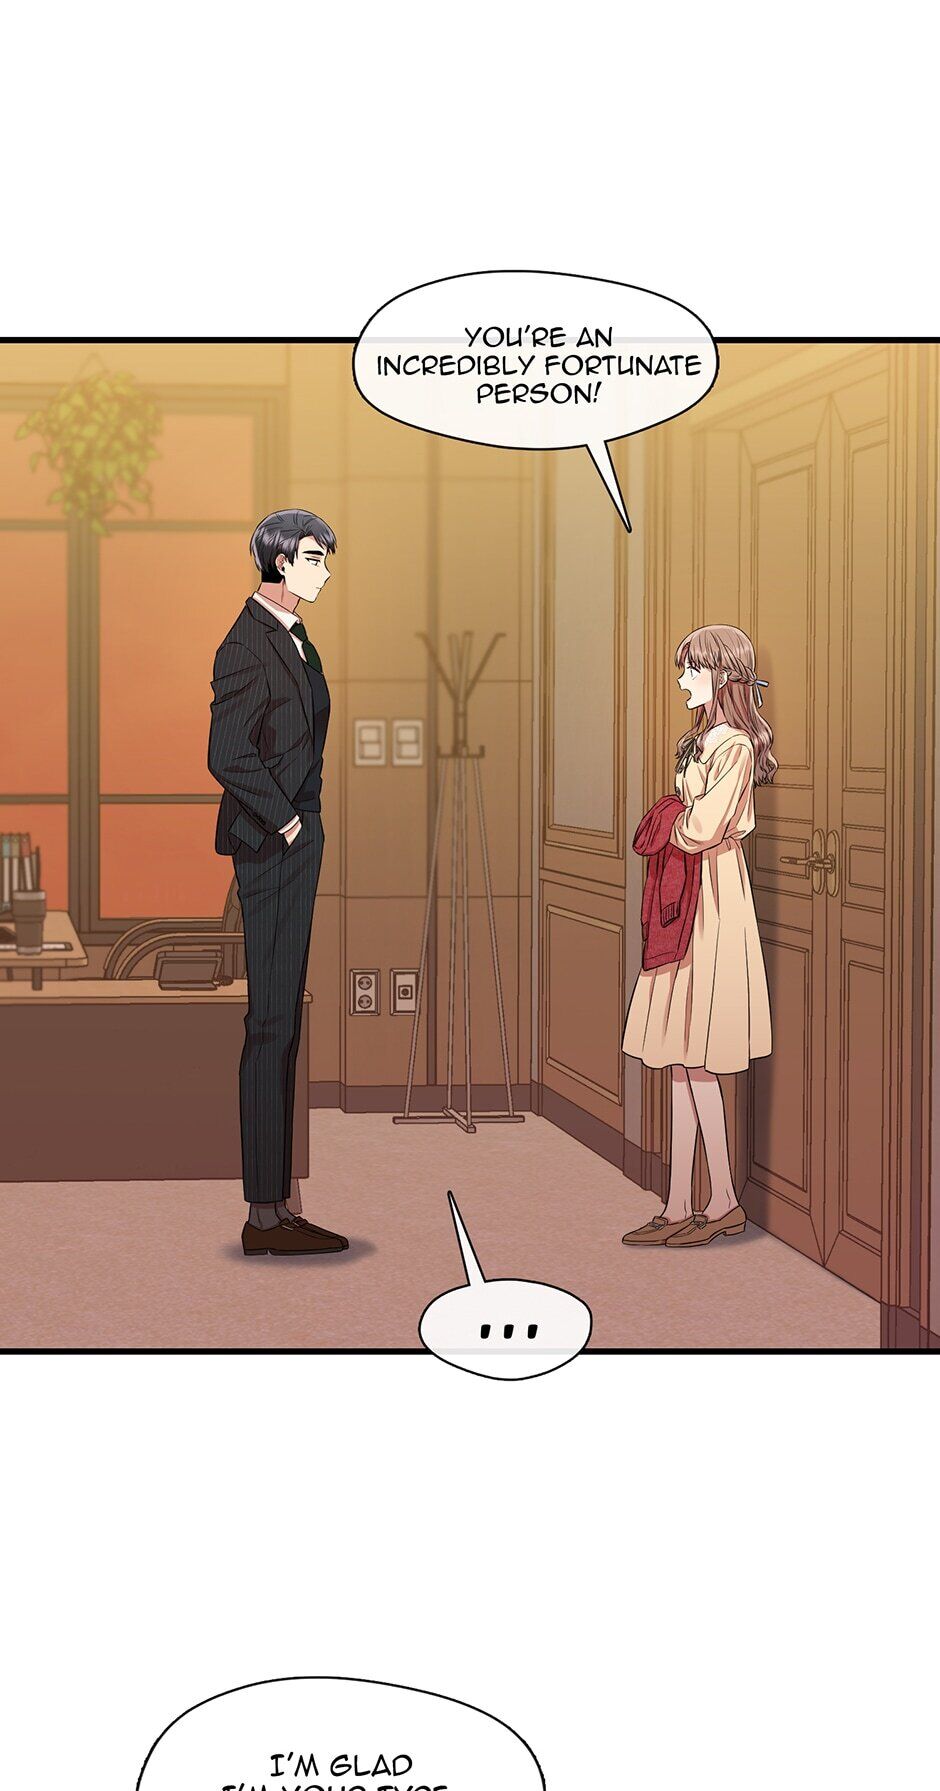 Office Romance Confidential chapter 22